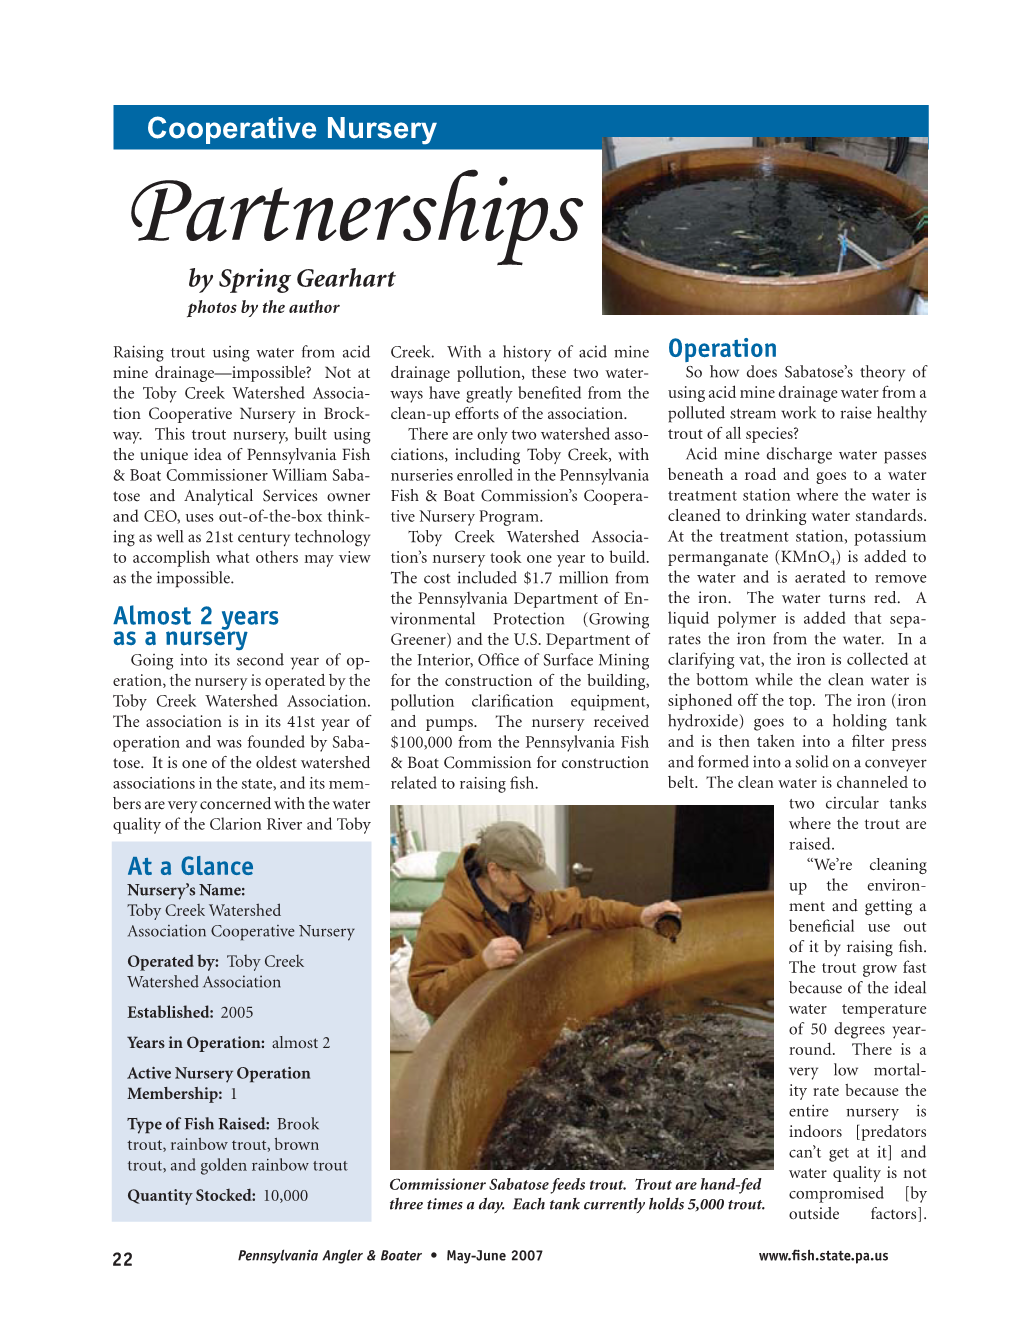 Cooperative Nursery Partnerships by Spring Gearhart Photos by the Author